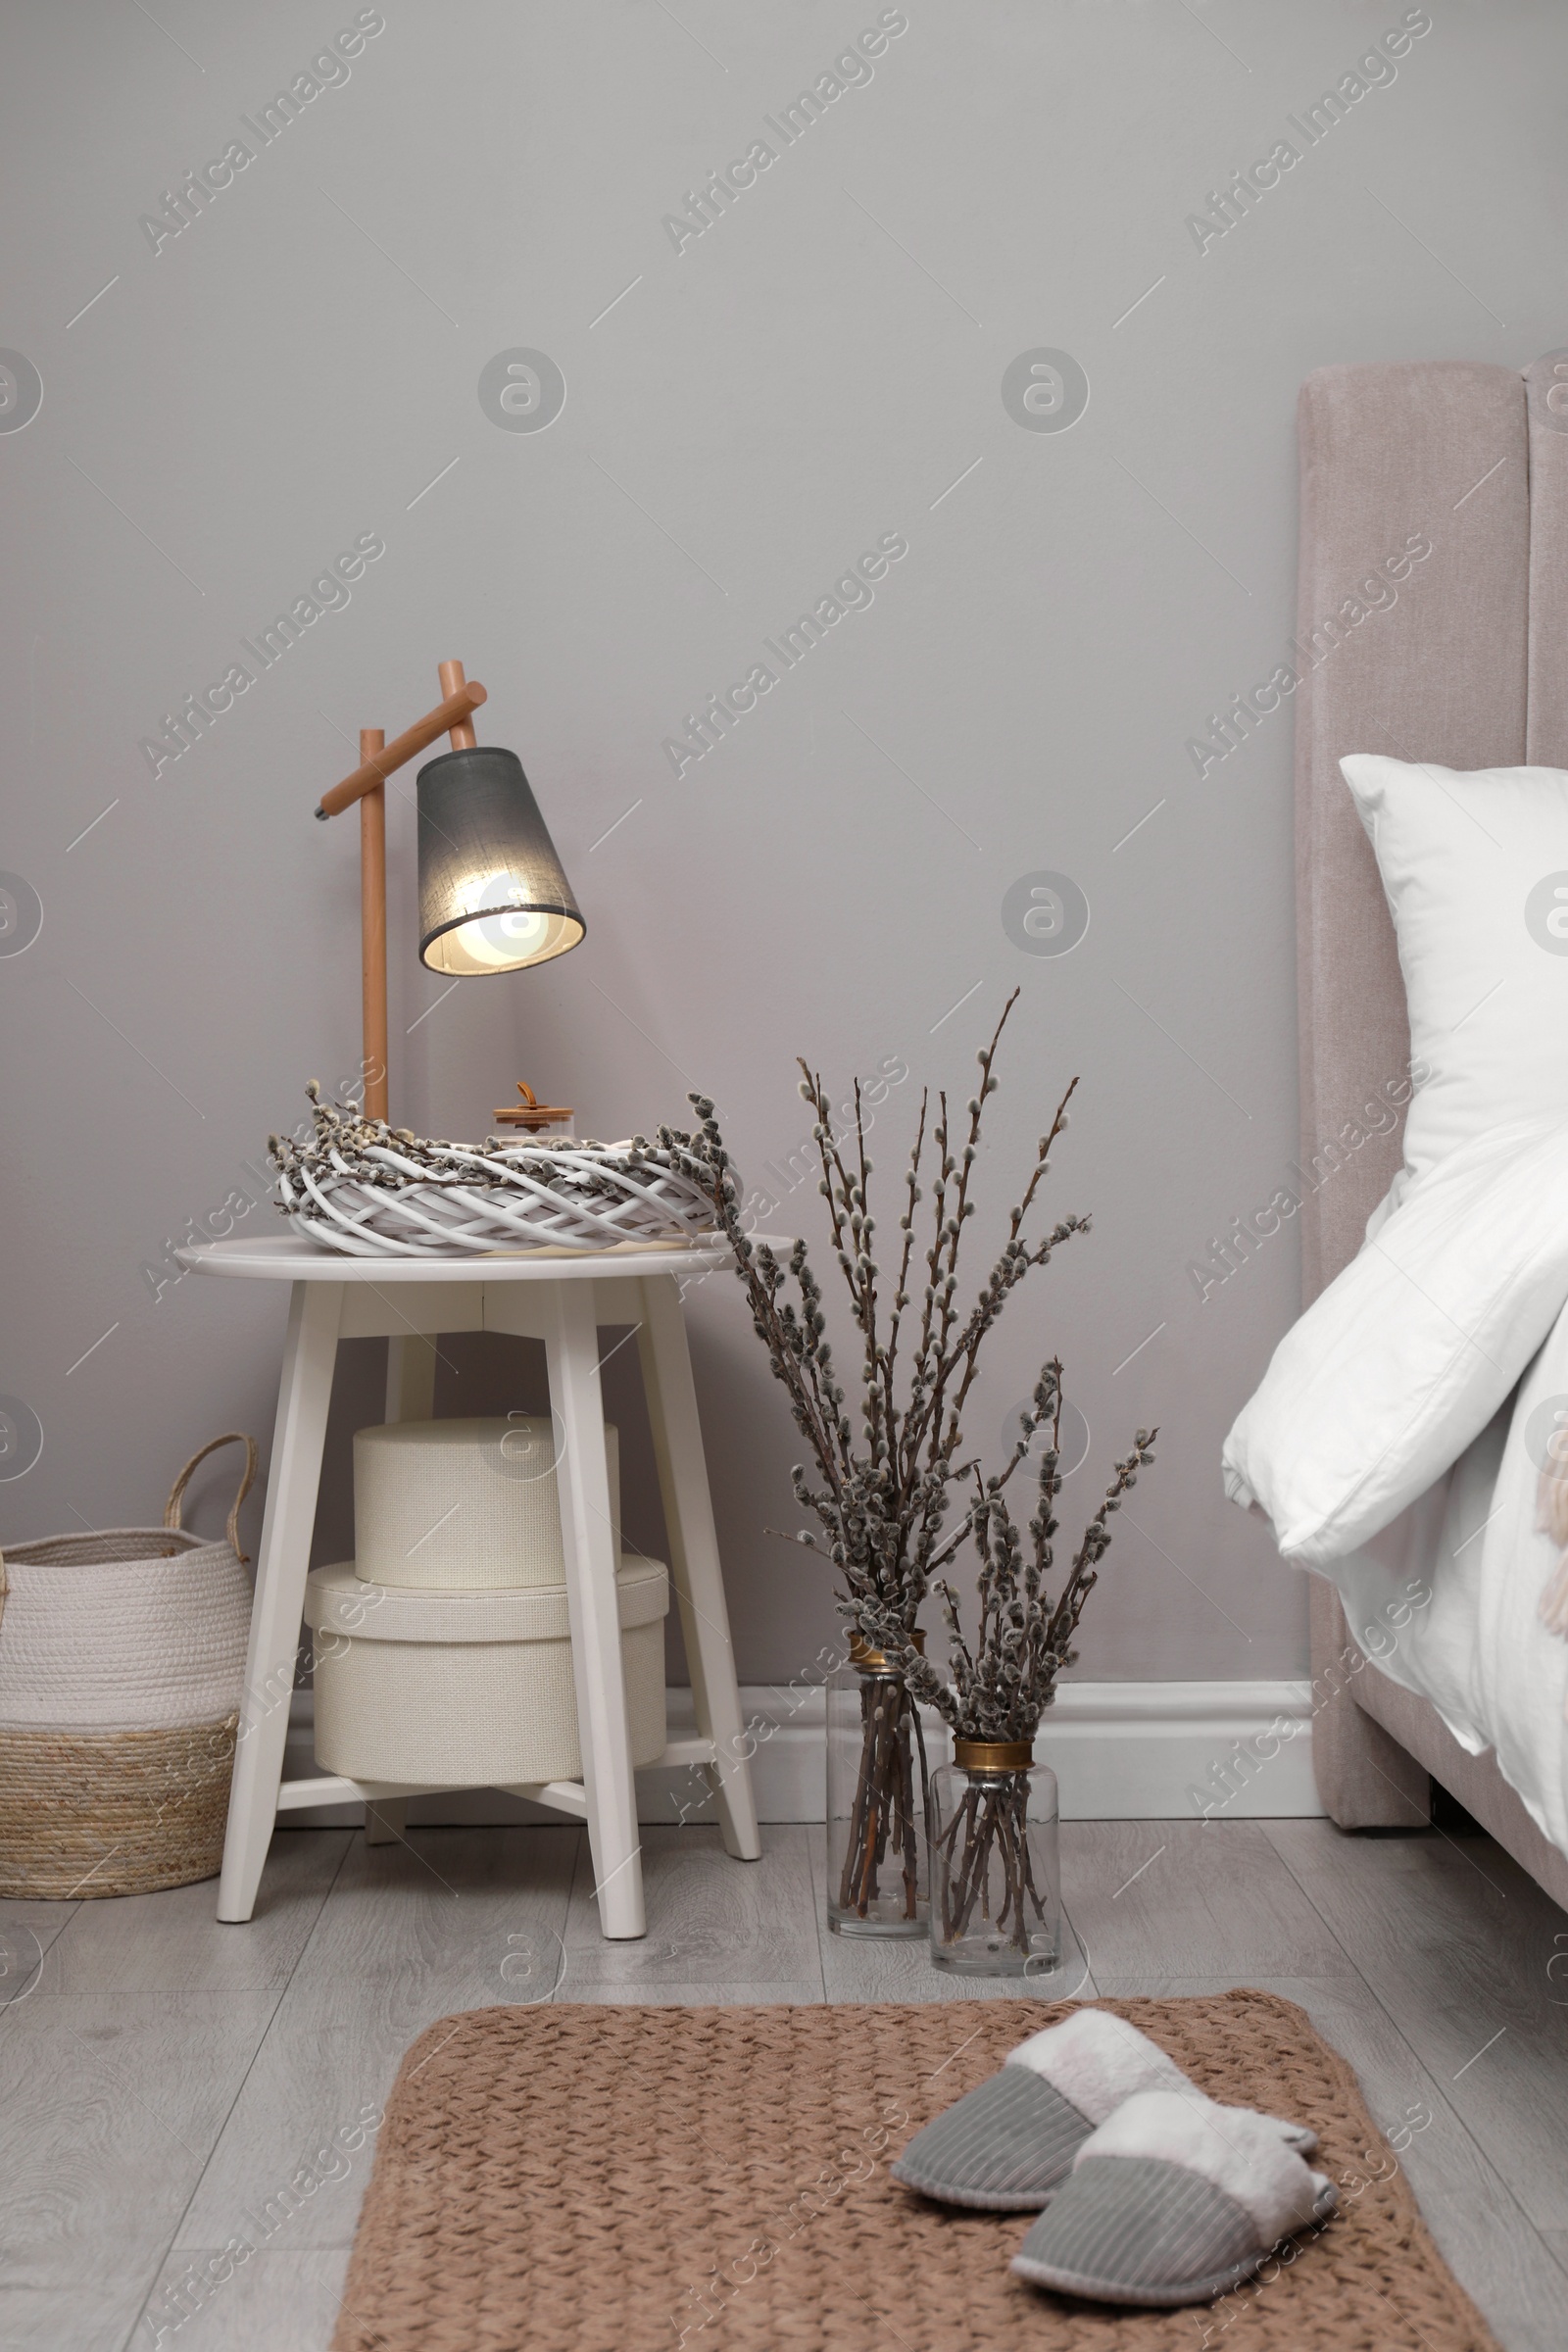 Photo of Bedroom interior with pussy willow branches and other decor